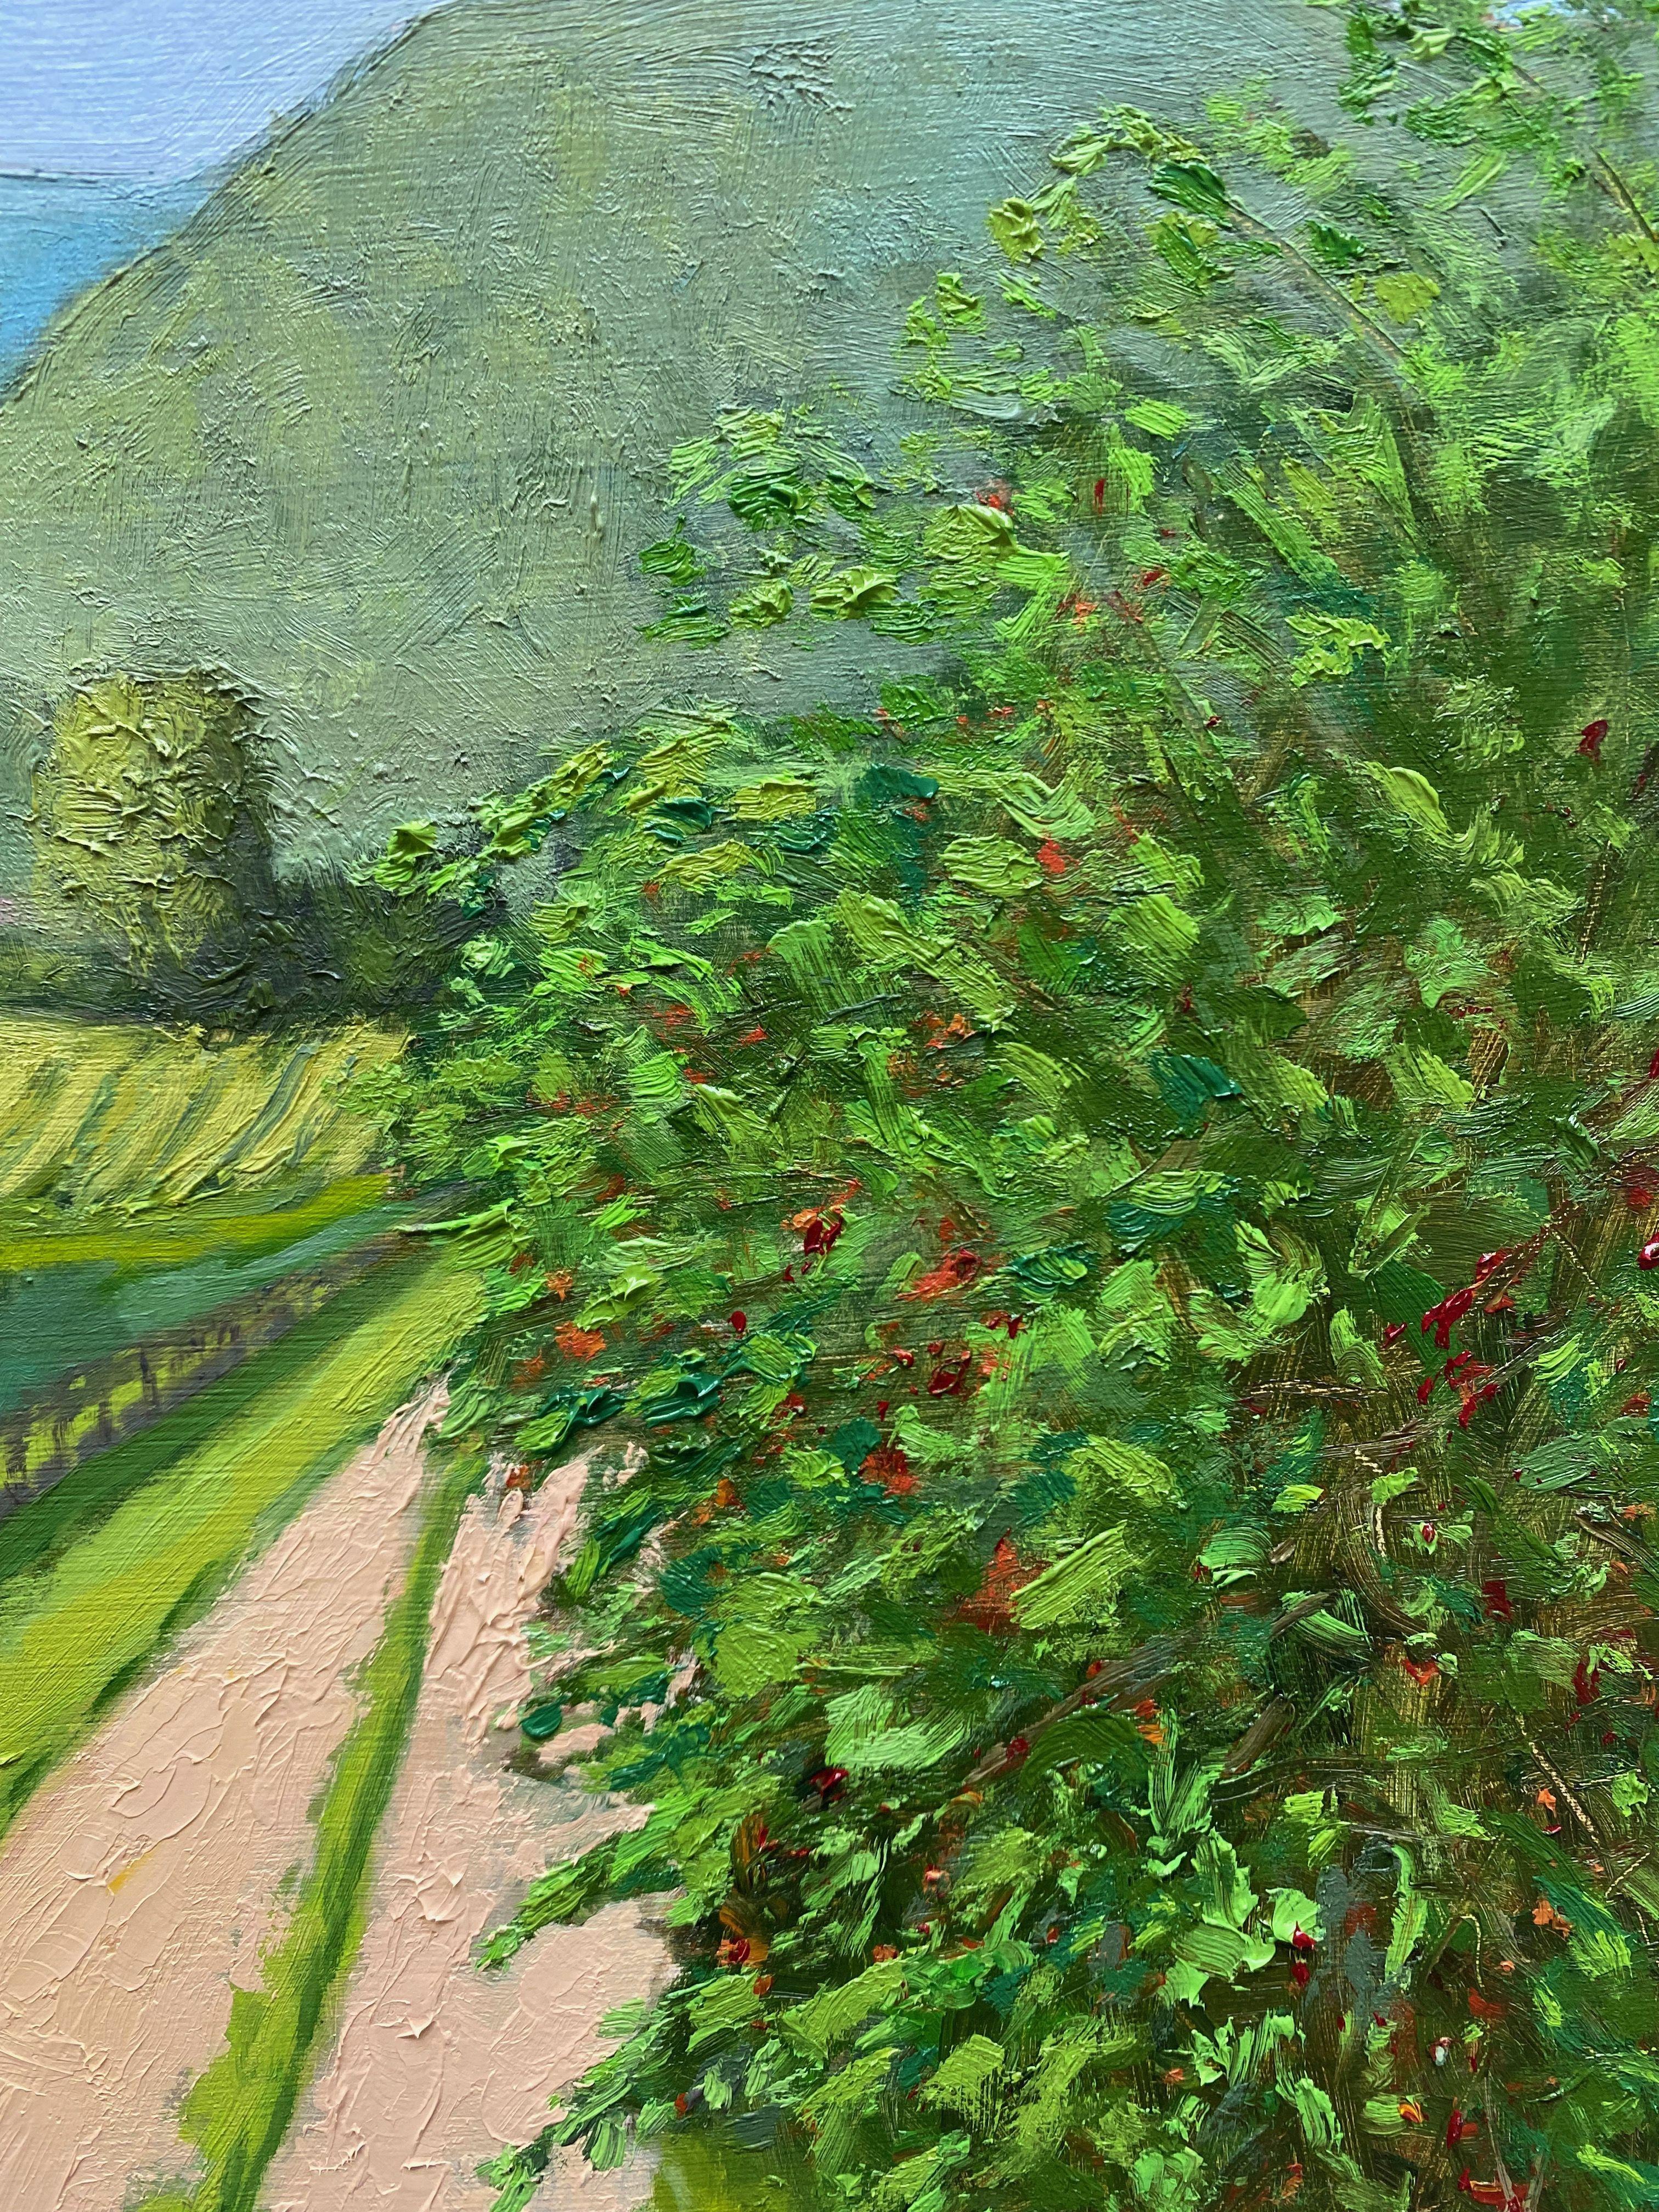 Painted plein air amongst Grape Vines with view of the Hambacher Castle, Germany. It was a very hot, hazy day. The sun, even with umbrella, was scorching without no mercy. A fascinating place with lizards and happy singing birds. :: Painting ::